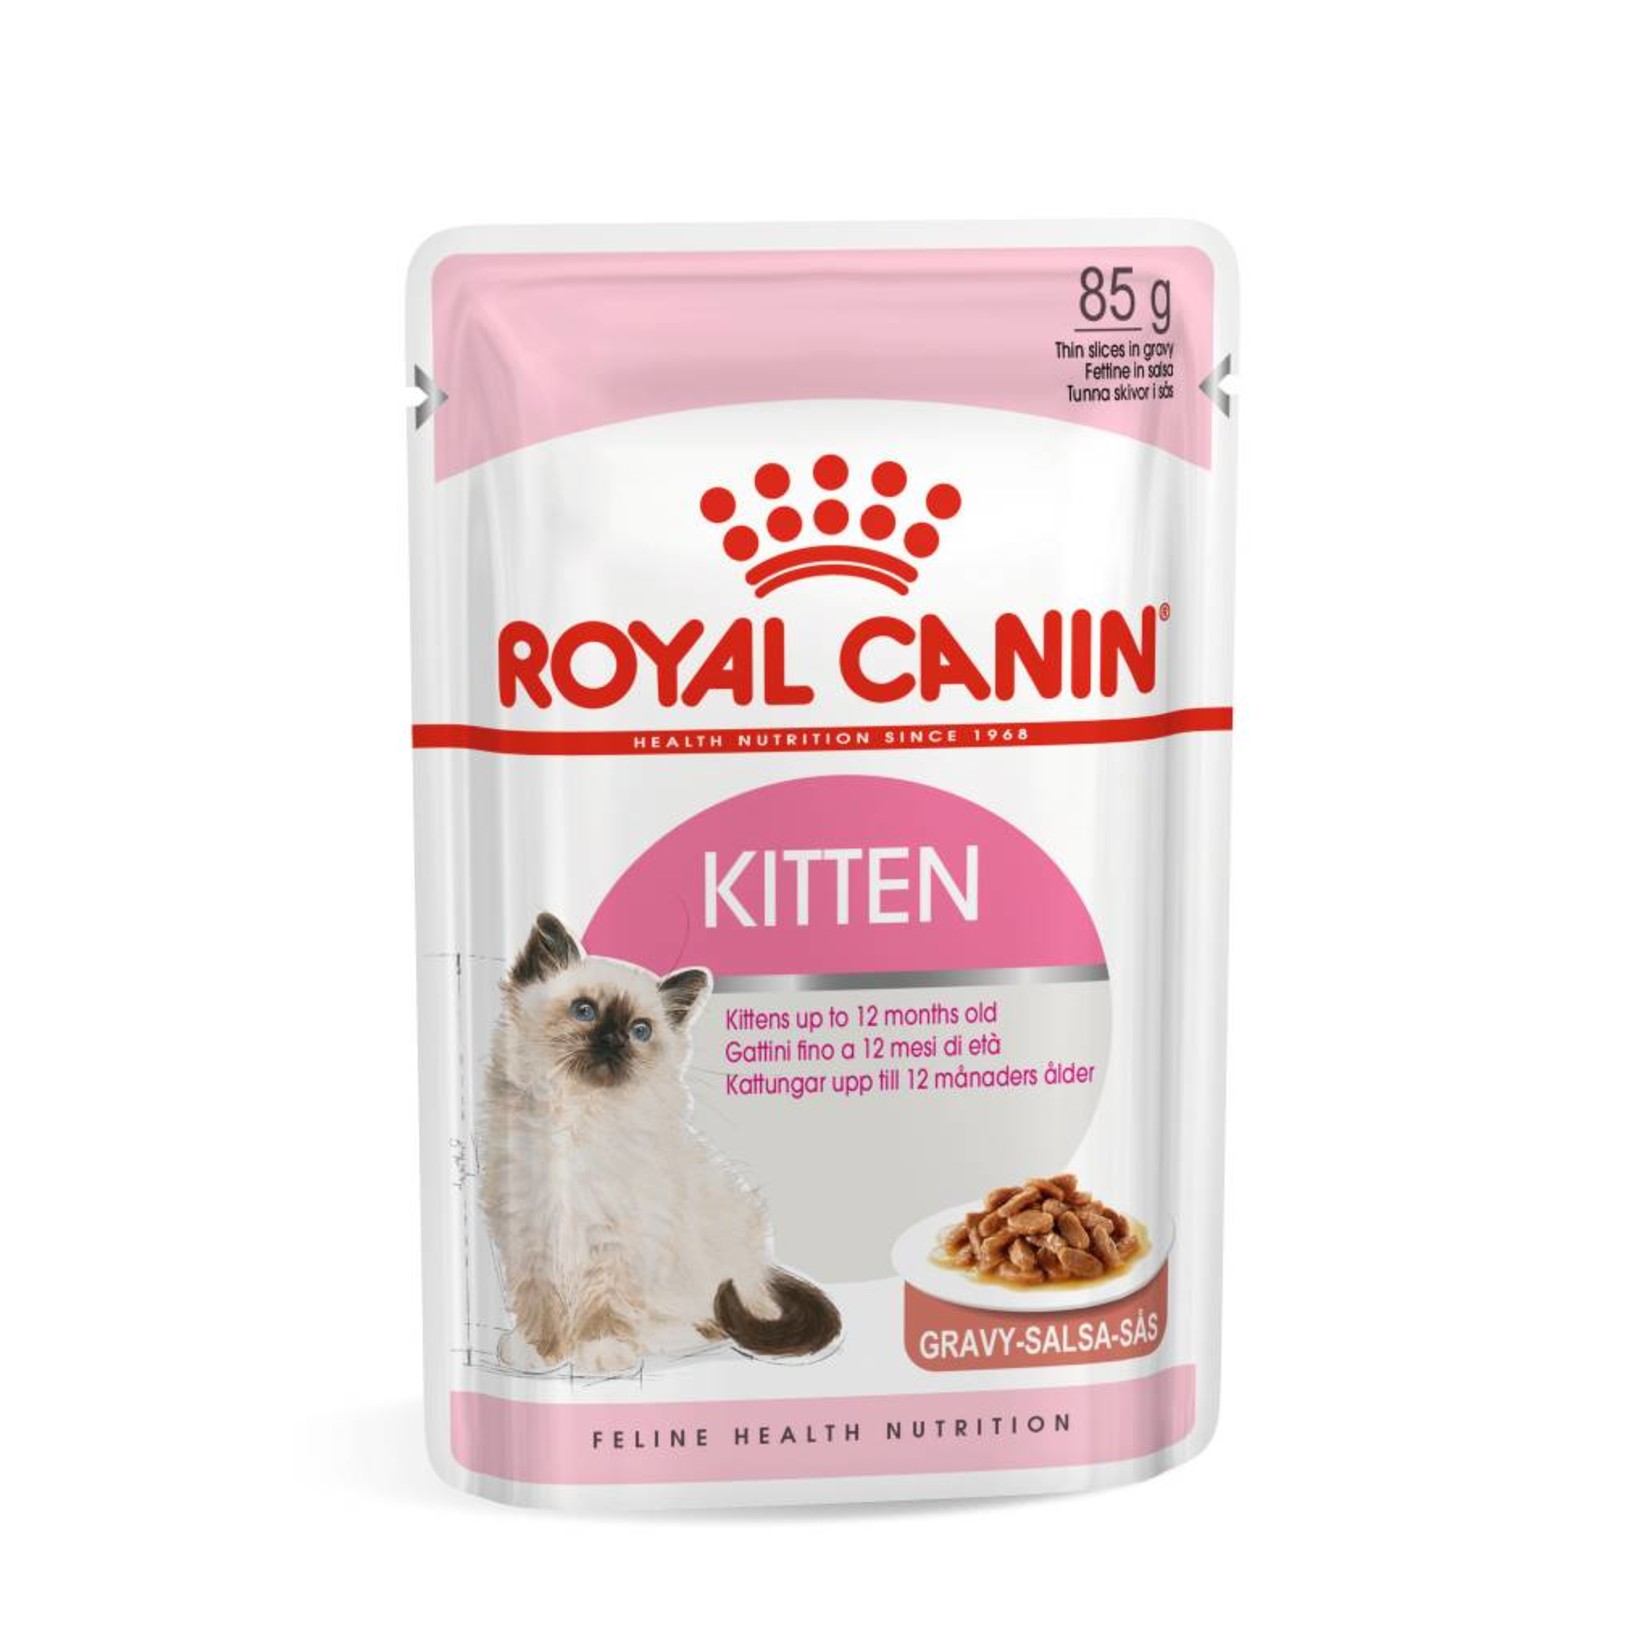 Royal Canin Kitten Wet Food Pouch with Gravy, 85g